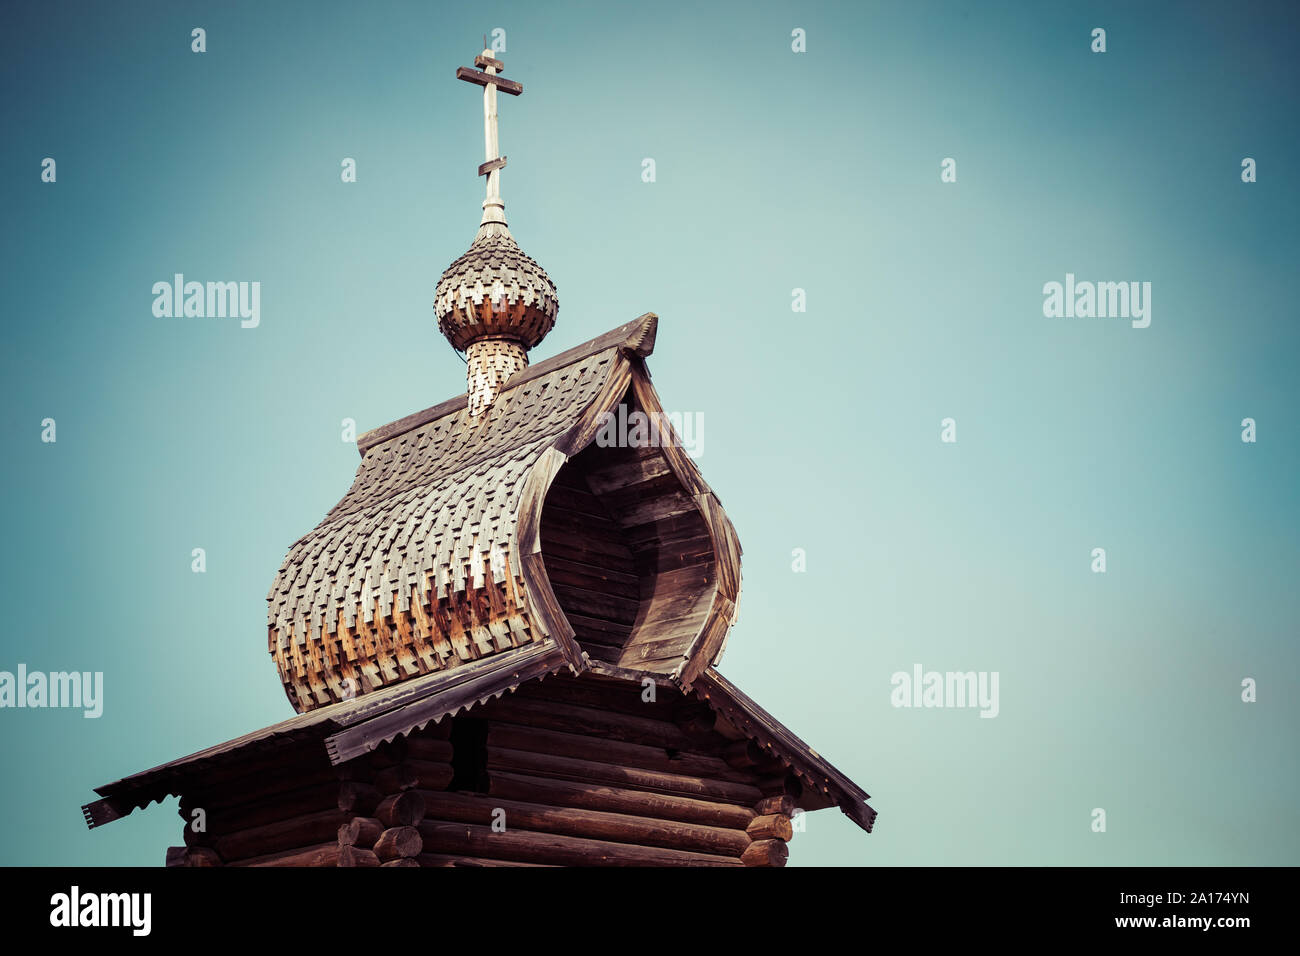 Traditional Siberian wooden house in the Taltsy Architectural-Ethnographic Museum. Stock Photo